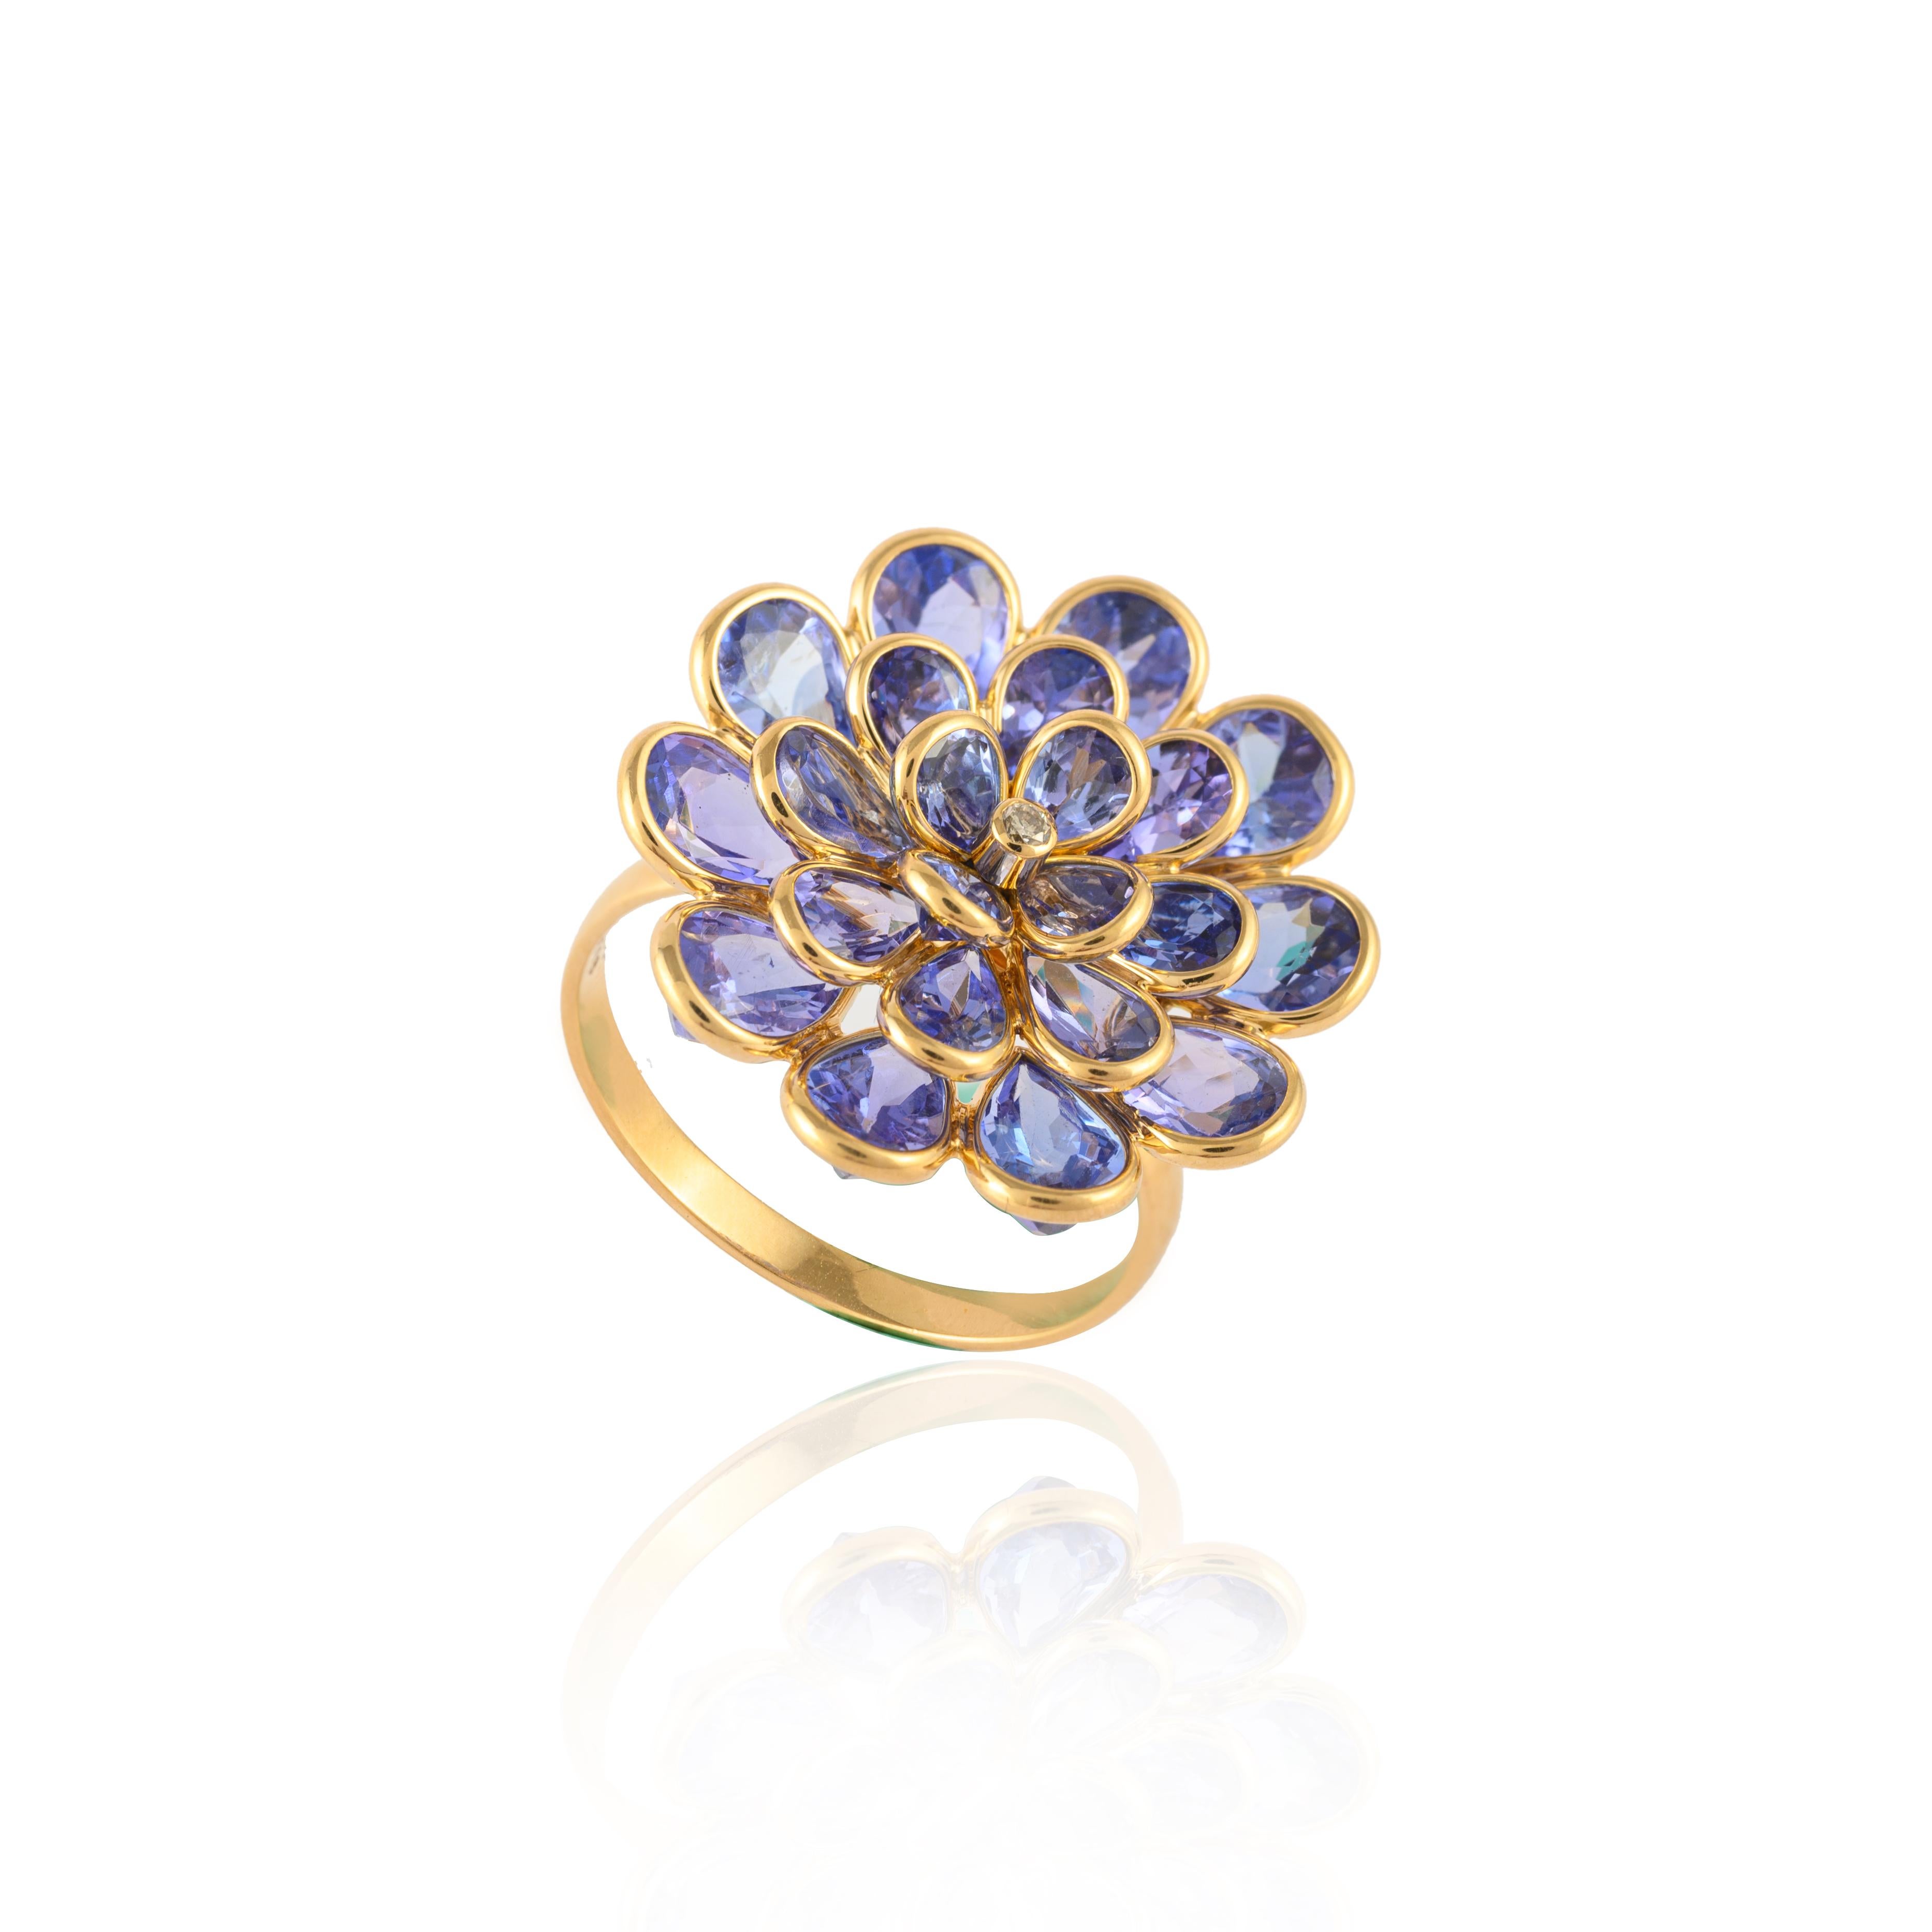 For Sale:  6.26ct Tanzanite Flower Ring with Diamond in 18k Solid Yellow Gold 11